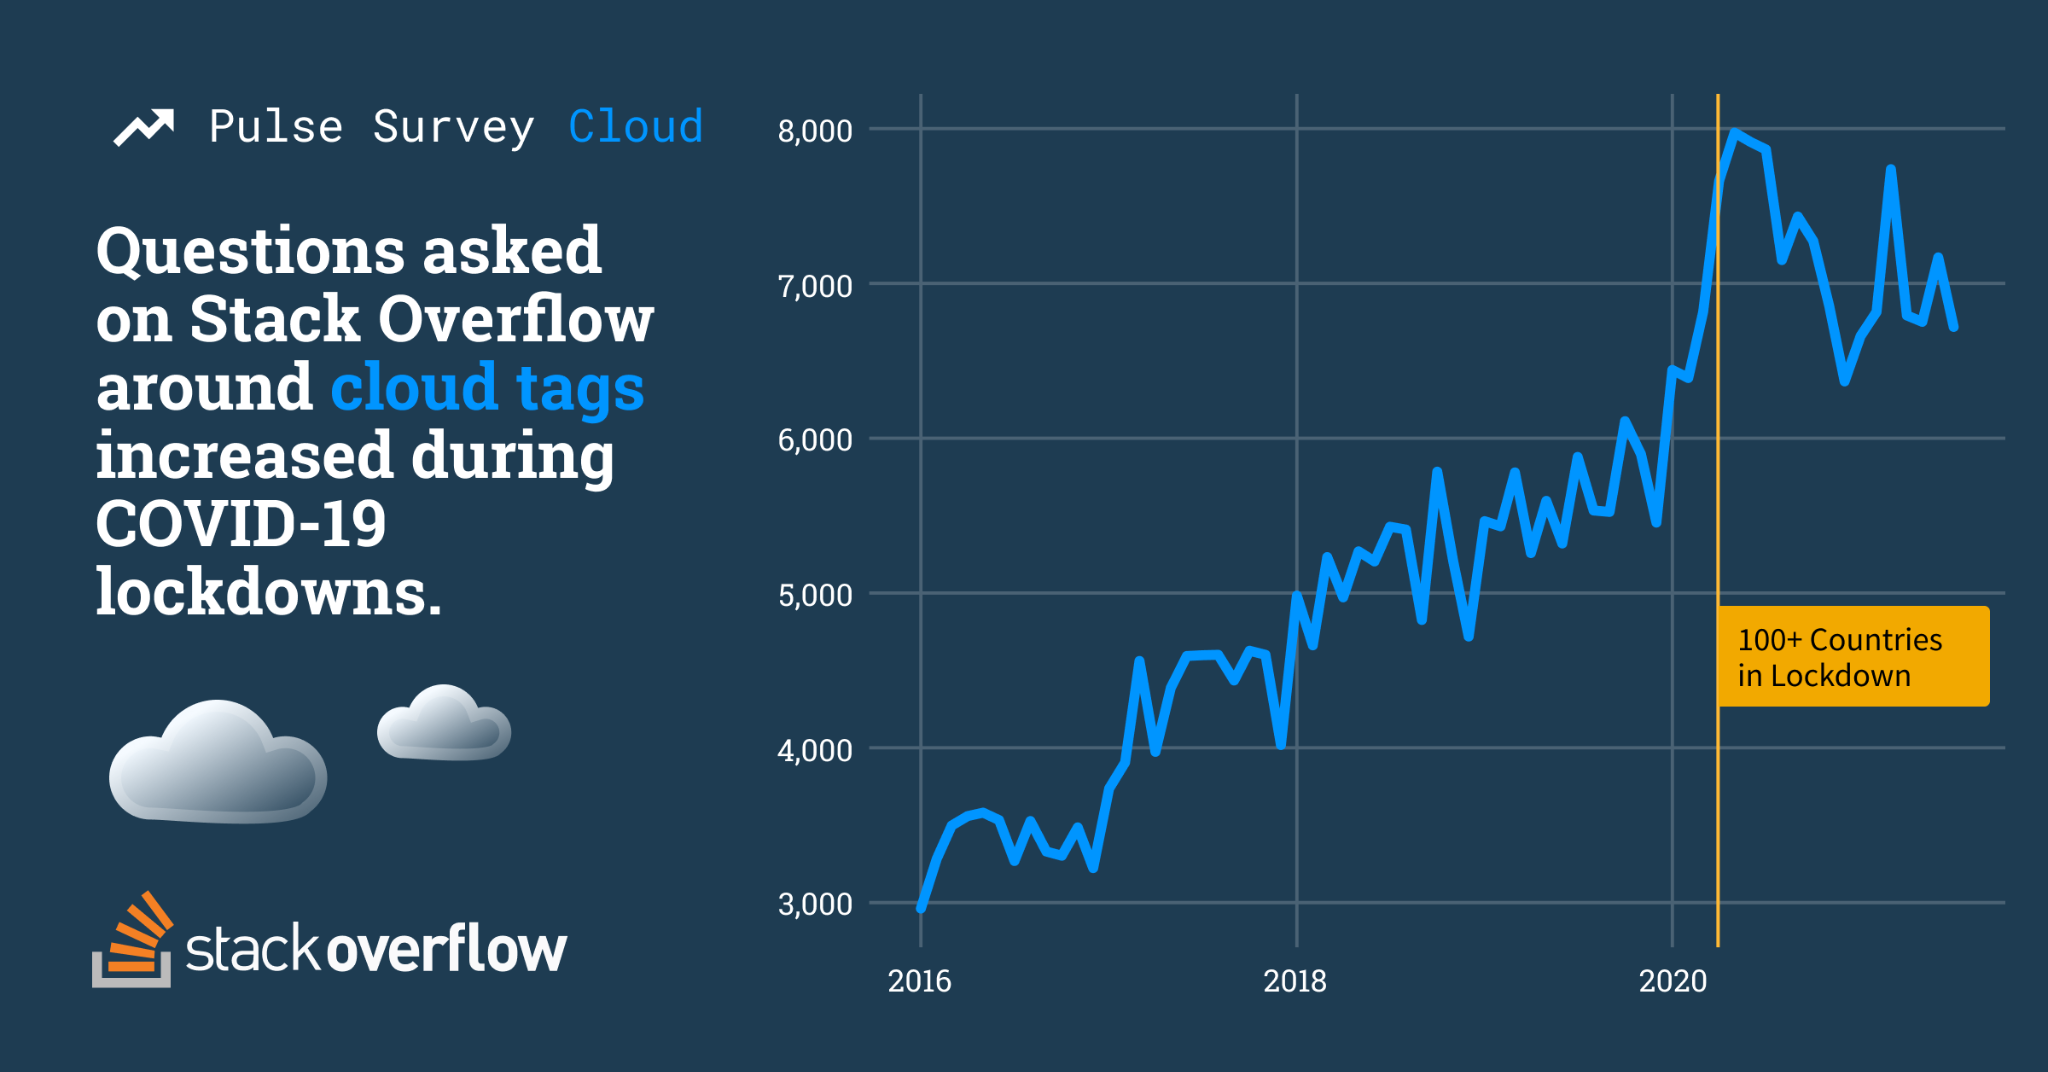 Line chart showing growth of cloud-related questions asked on Stack Overflow from 2016 to September 2021. In March 2020, we saw a dramatic spike reaching close to 8,000 questions asked. This is the time that 100+ countries entered lockdown.